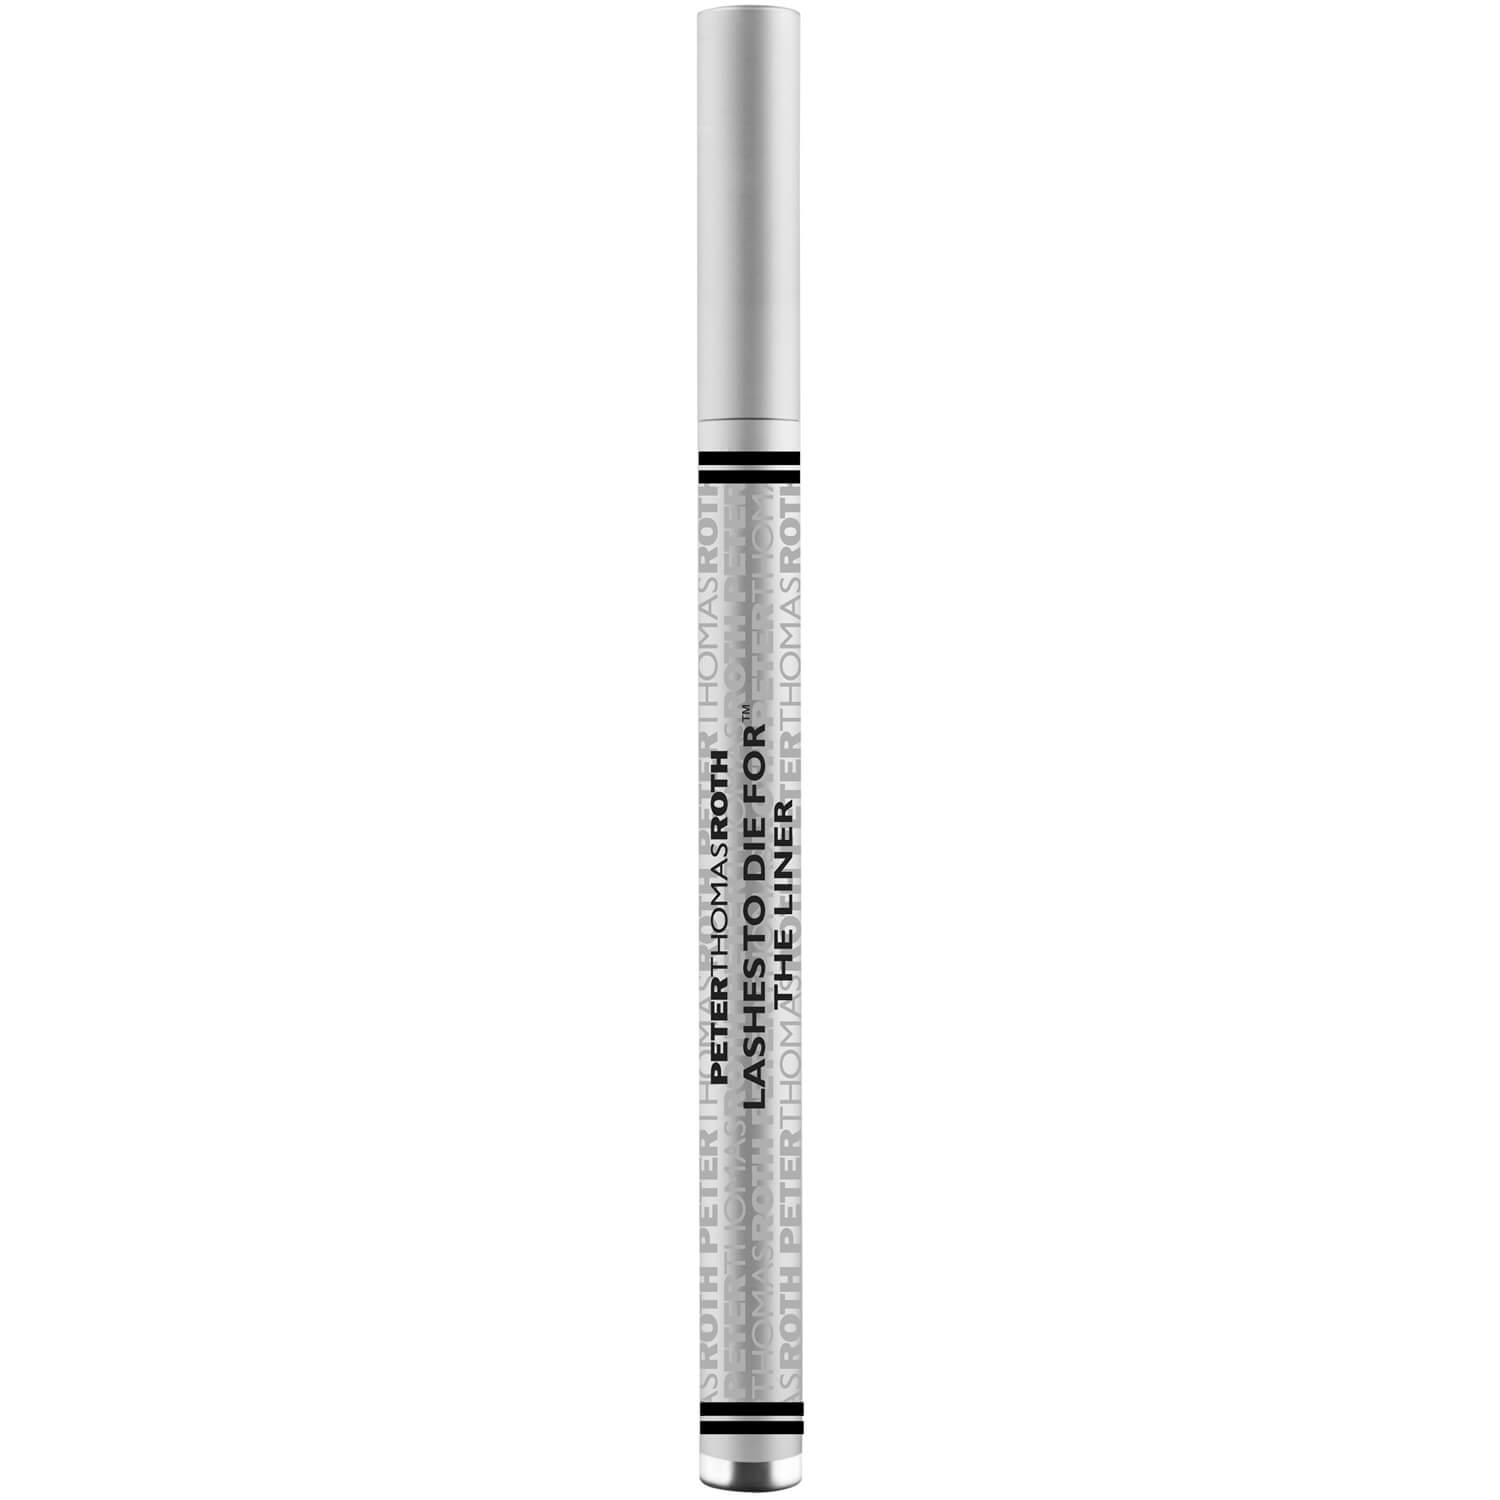 Delineador Lashes To Die For de Peter Thomas Roth (1,2 ml)